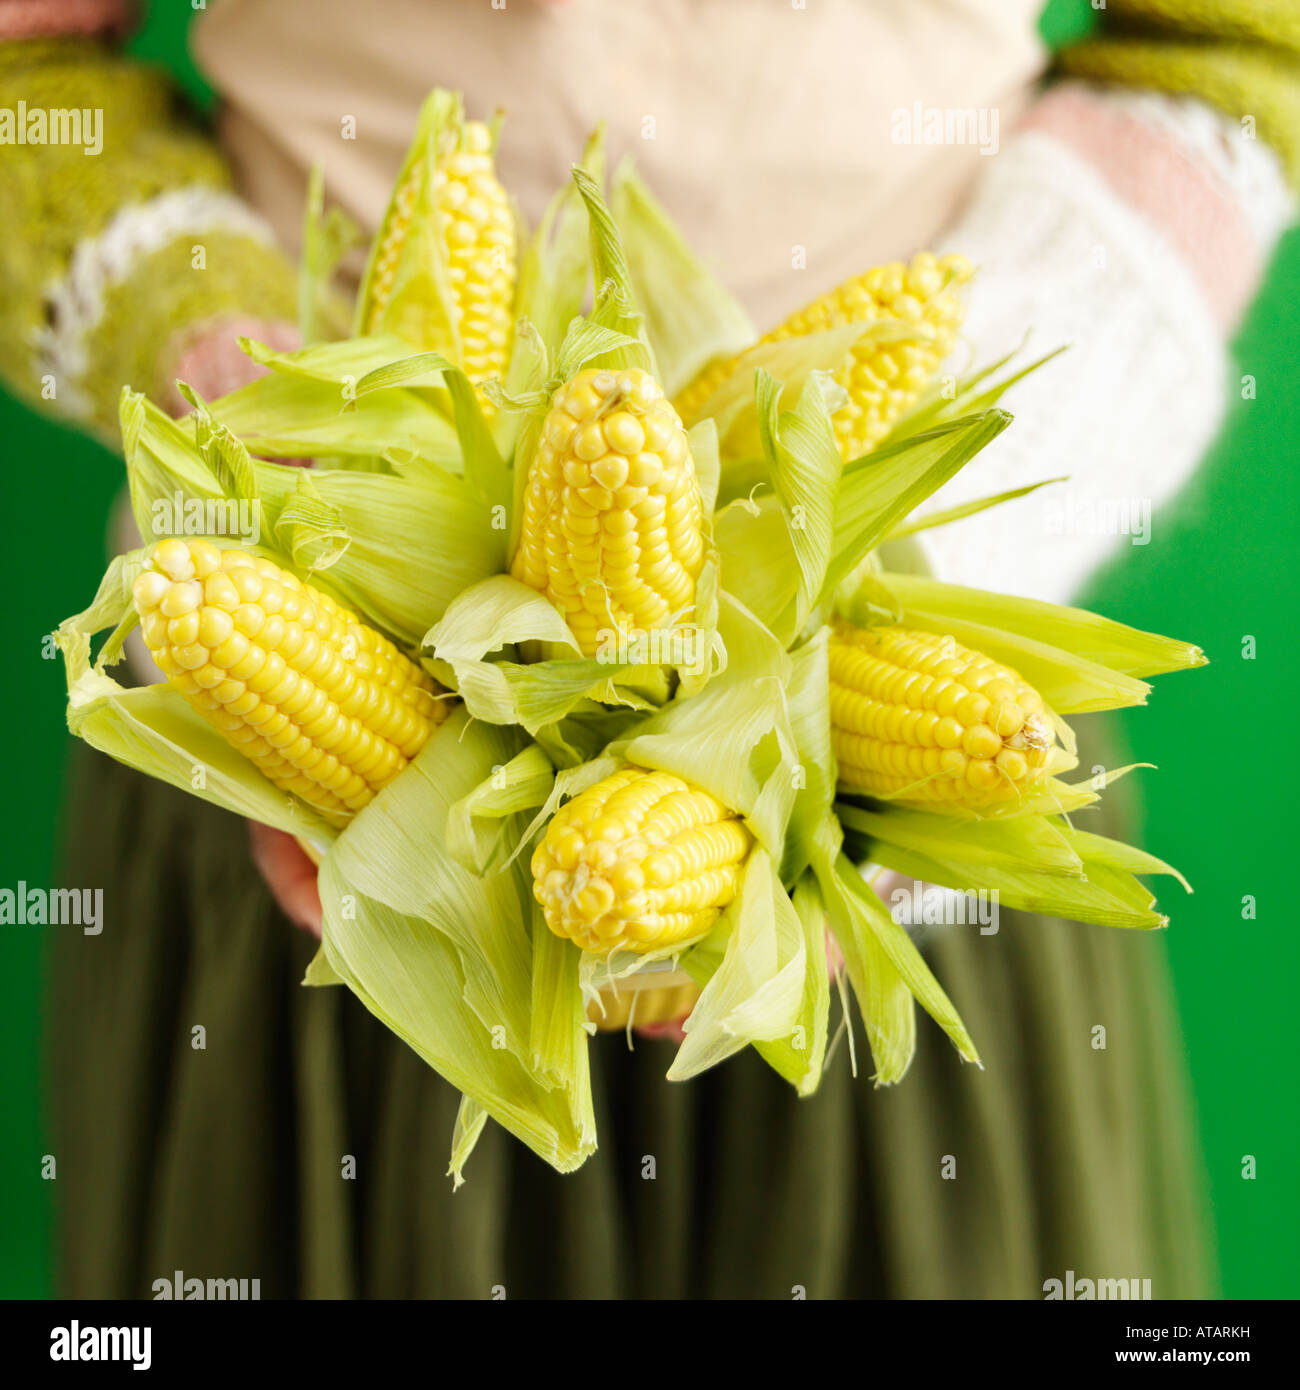 Woman holding bouquet of ears of corn Stock Photo